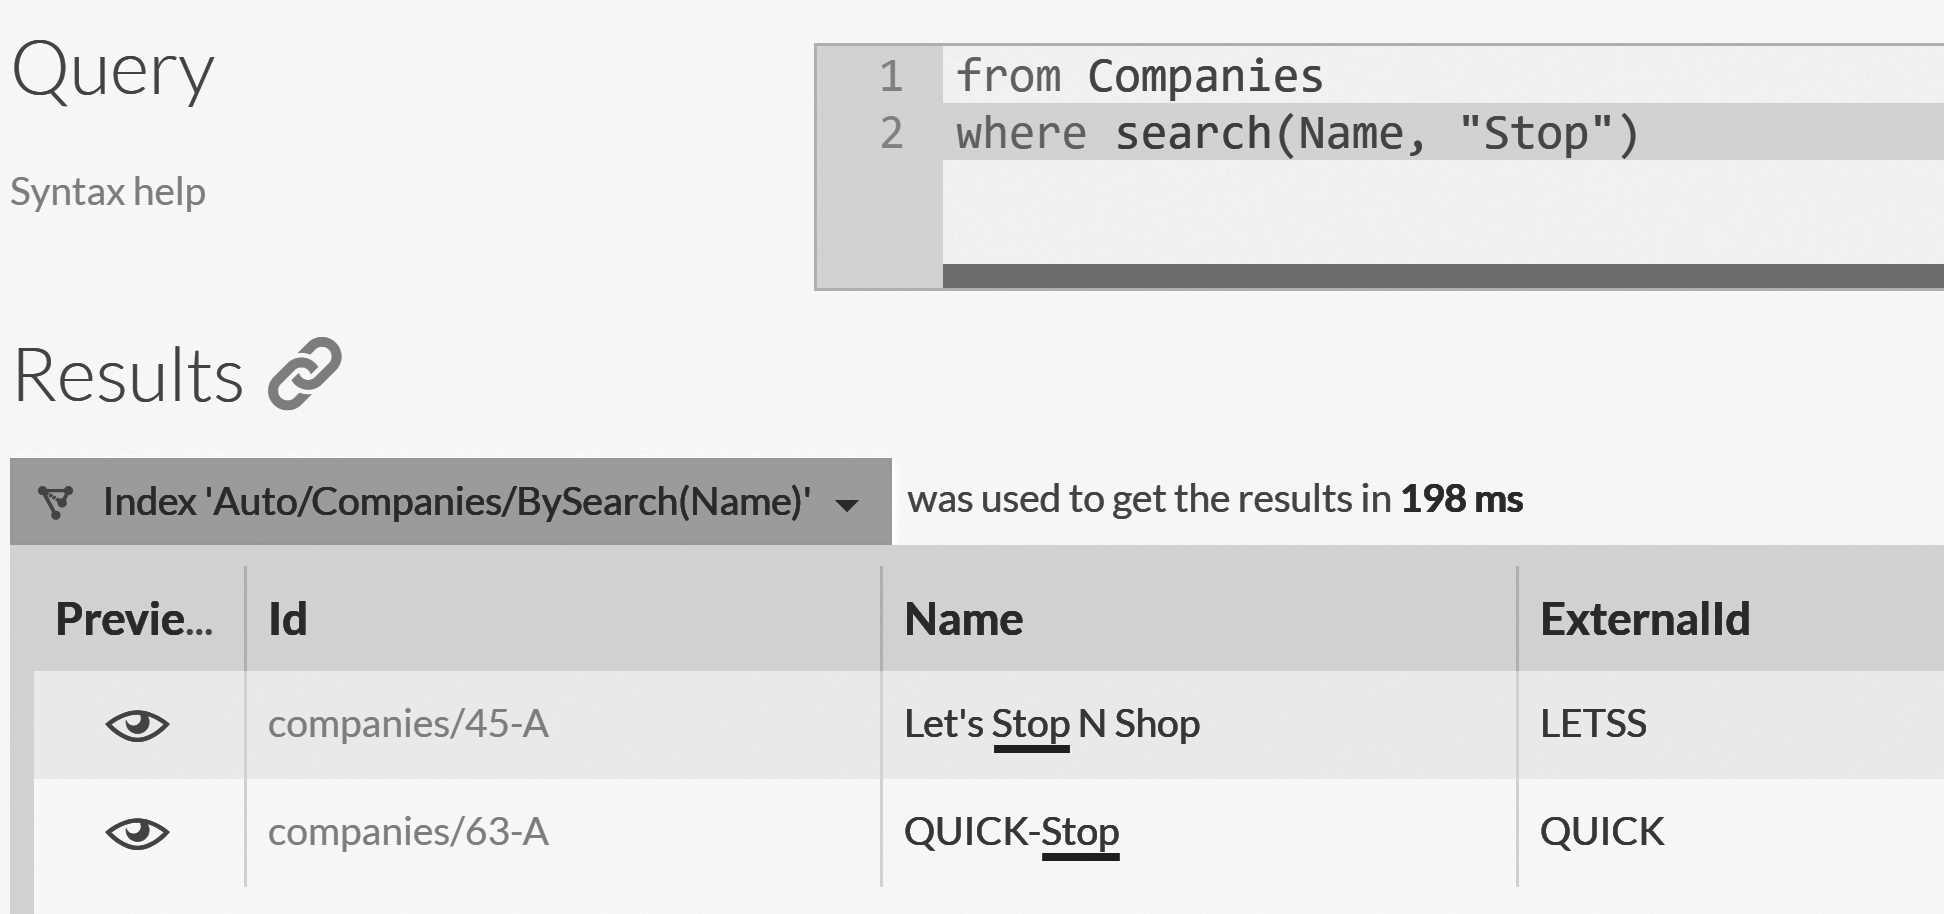 Full text search queries on companies' name